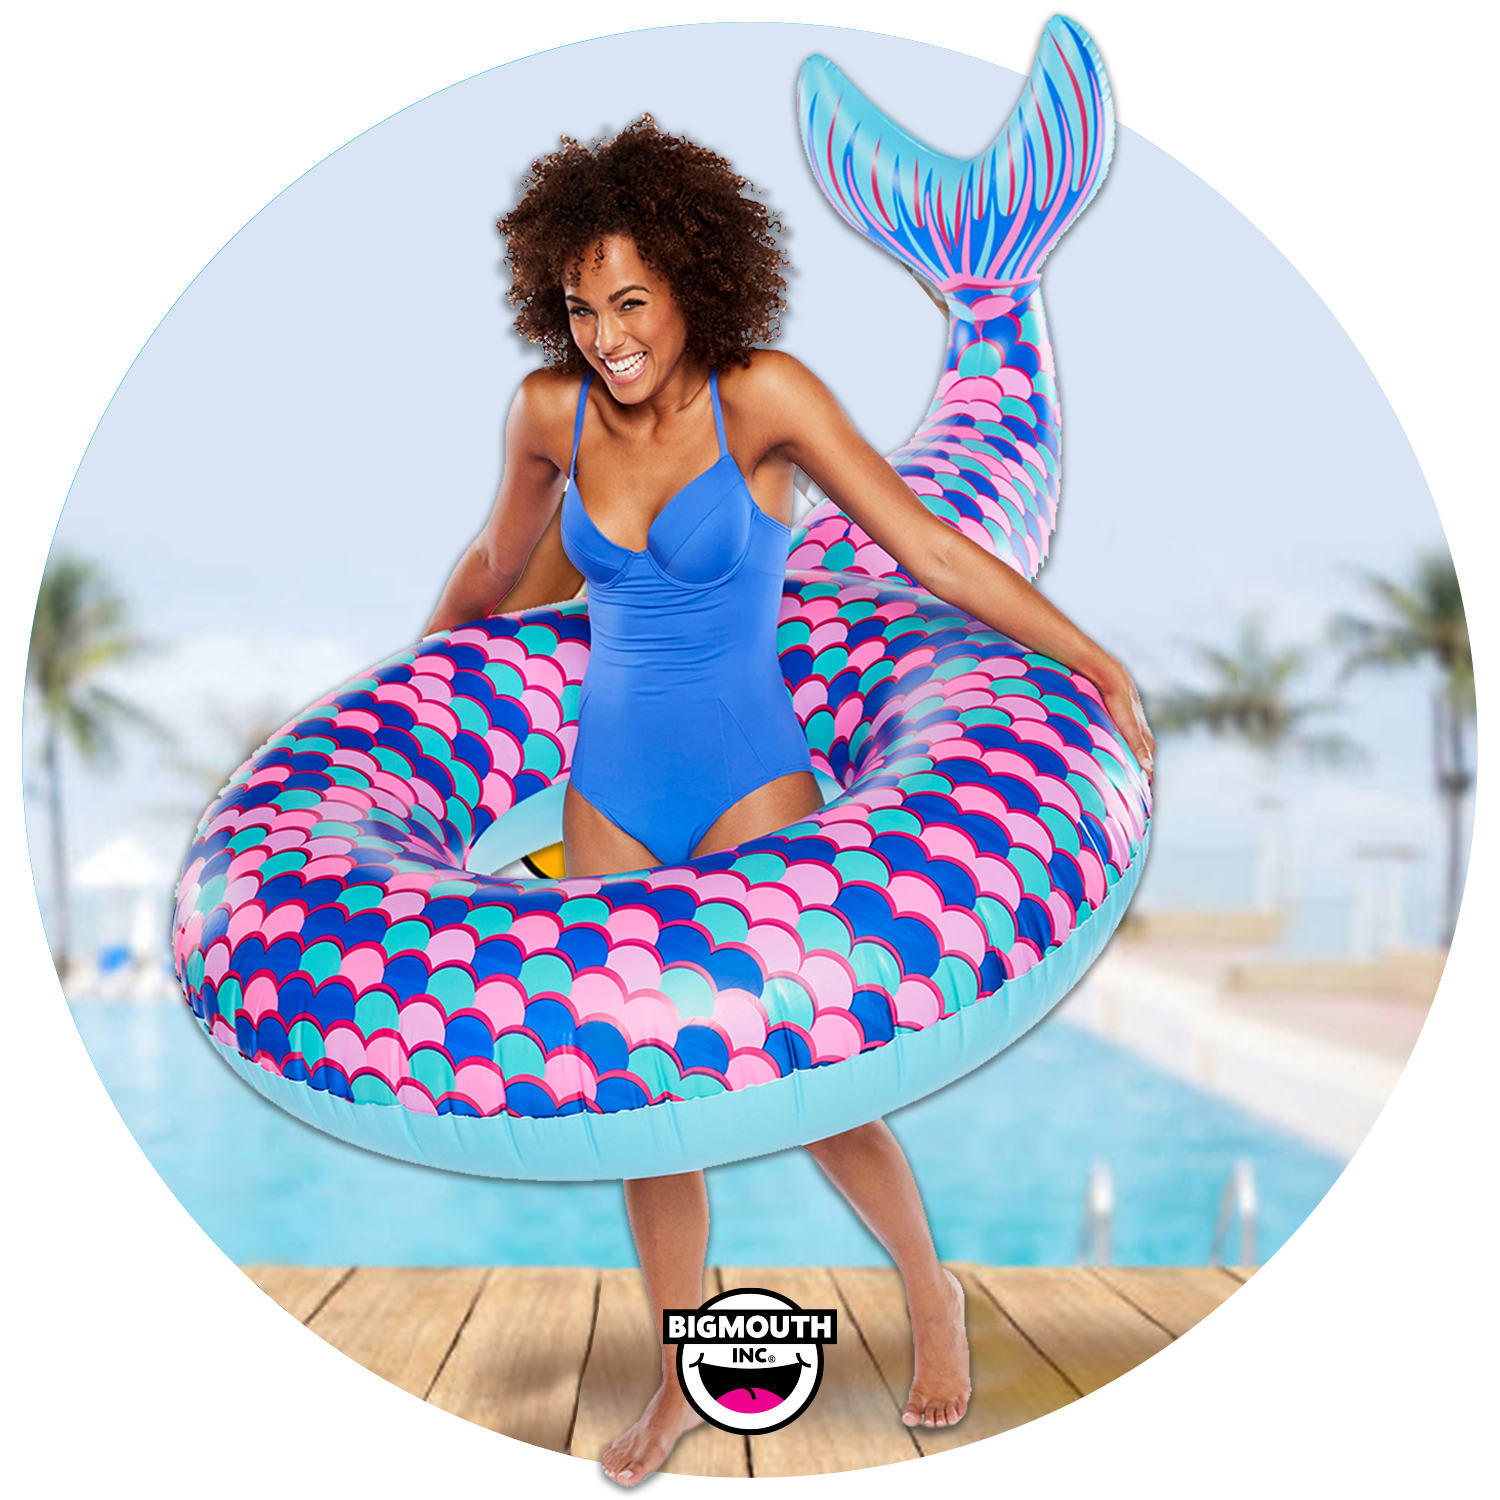 BigMouth Inc  Pool Floats, Giant Inflatables, Great Gift Ideas